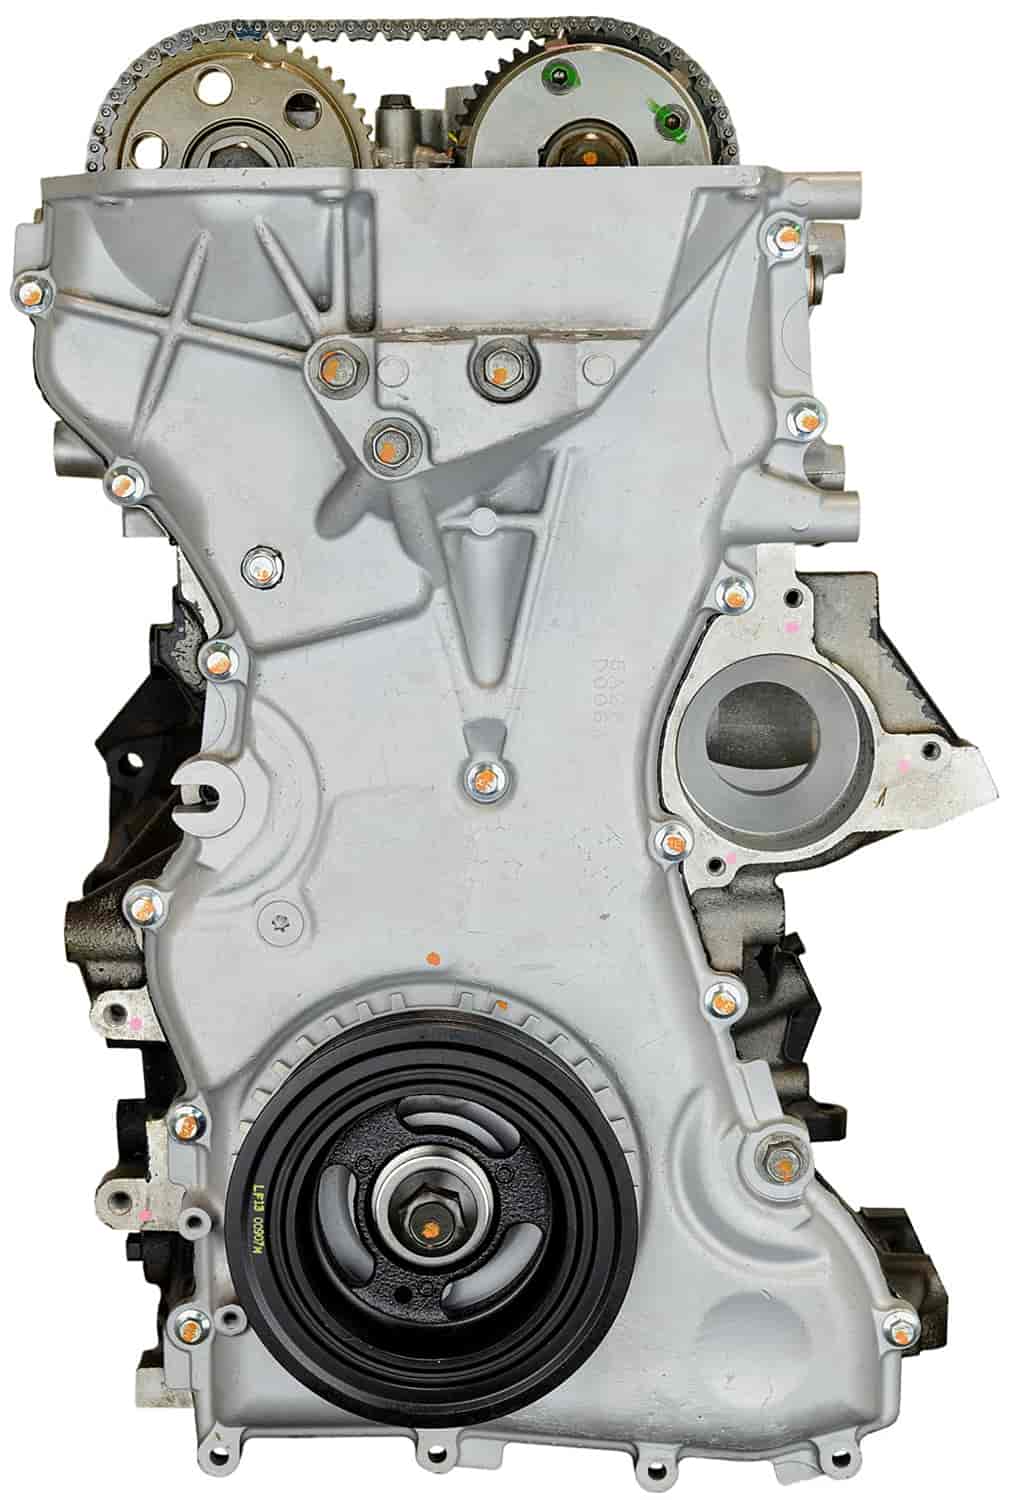 Remanufactured Crate Engine for 2004-2007 Mazda 3 & 5 with 2.3L L4